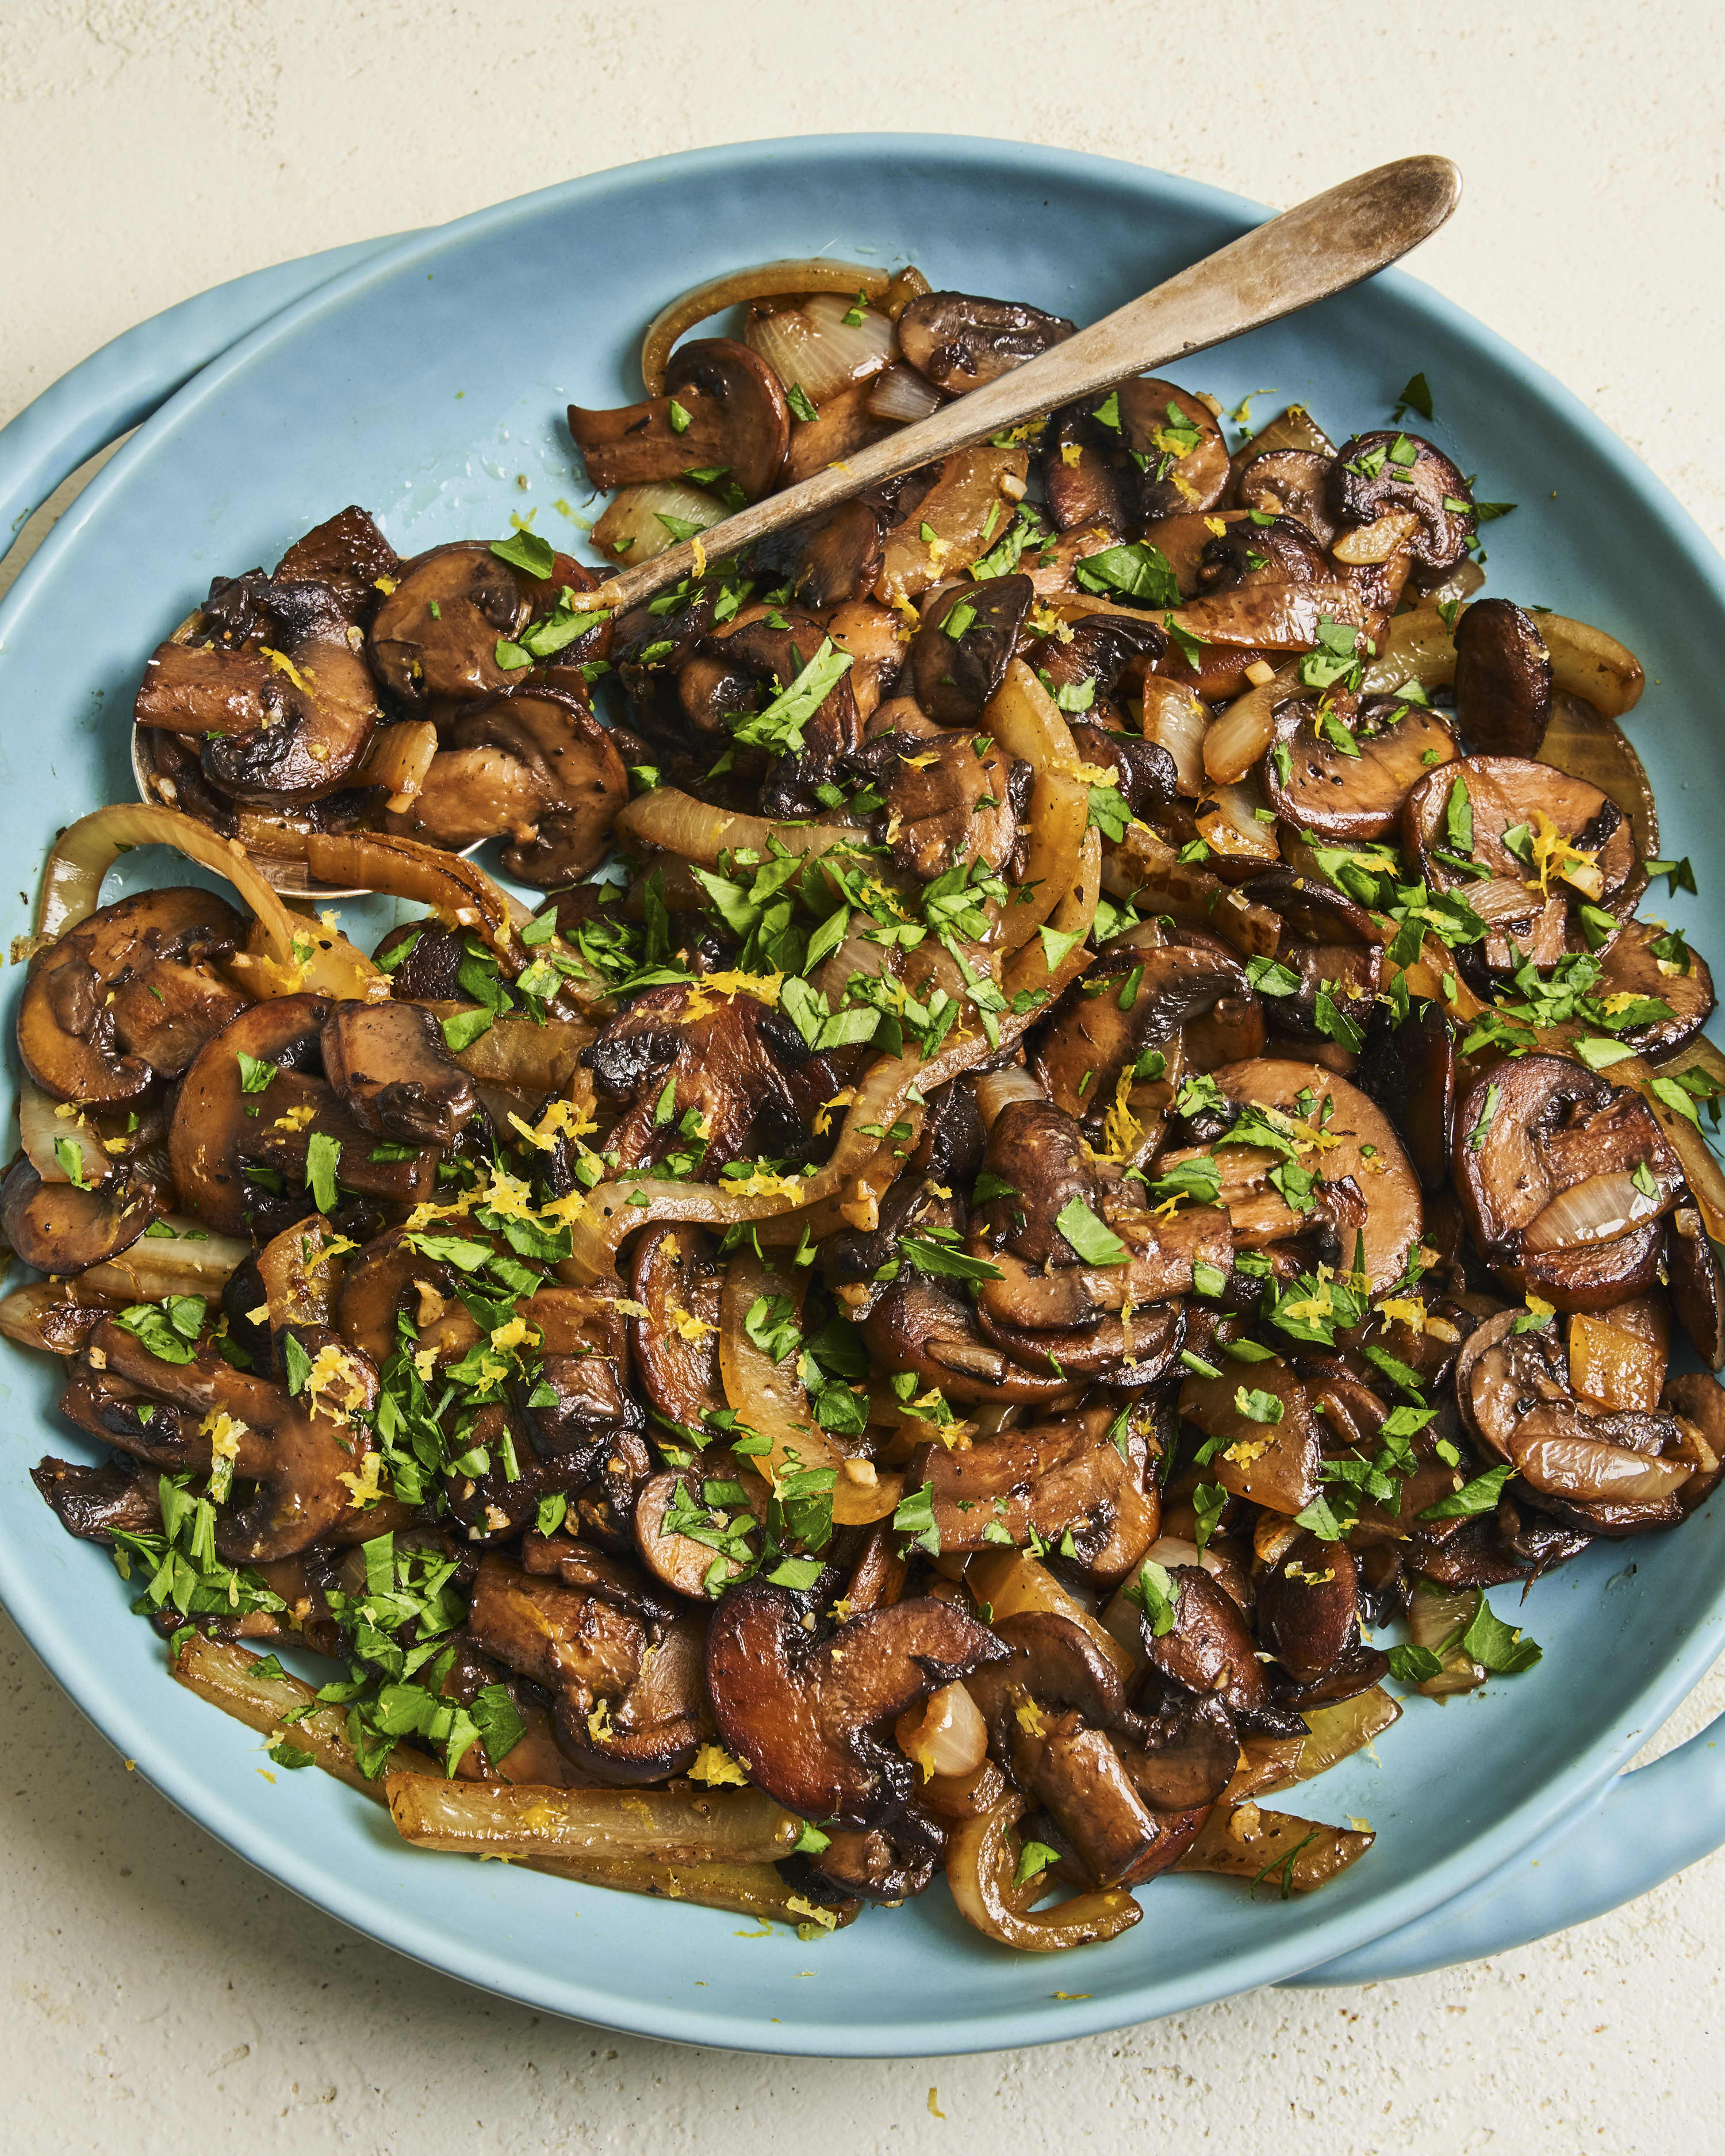 Sautéed Mushrooms and Onions Recipe (Quick and Easy)